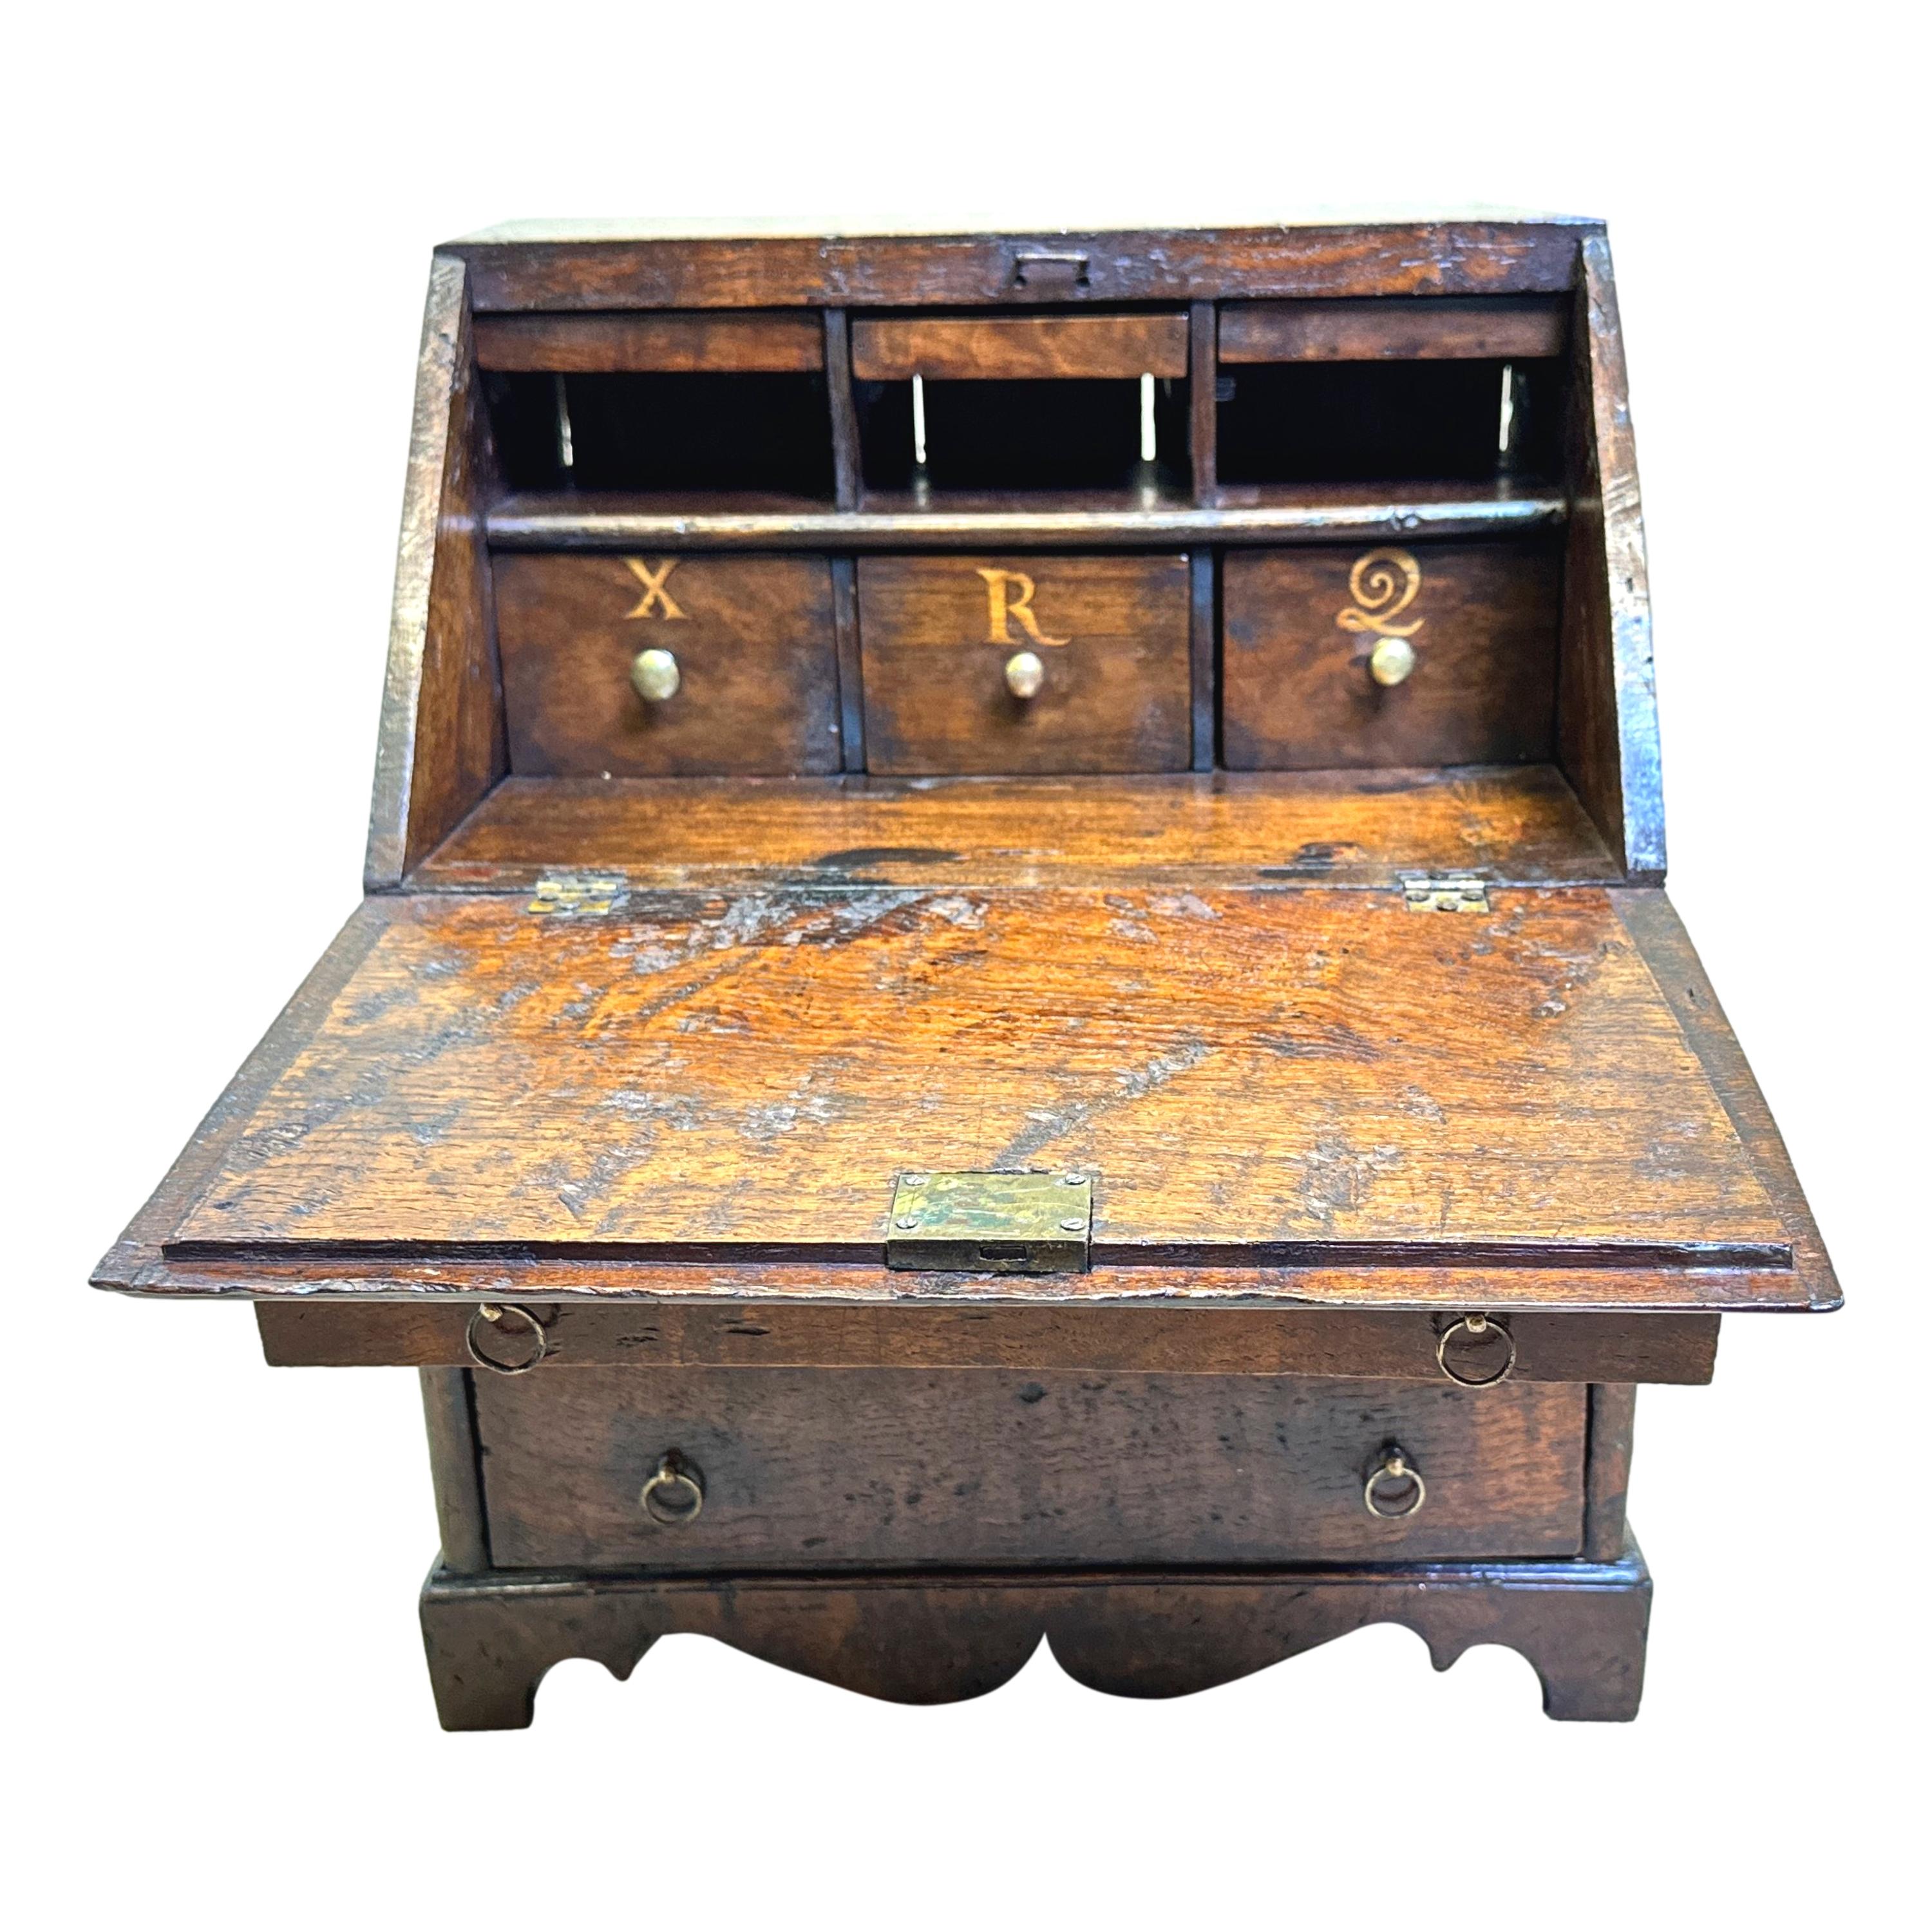 An Extremely Rare Mid 18th Century, George II Period Elm Table Top, Miniature, Bureau Retaining Exceptional Colour And Patina To Figured Timber Throughout, Having Fall Front Enclosing Fitted Interior, Over Three Long Drawers With Original Brass